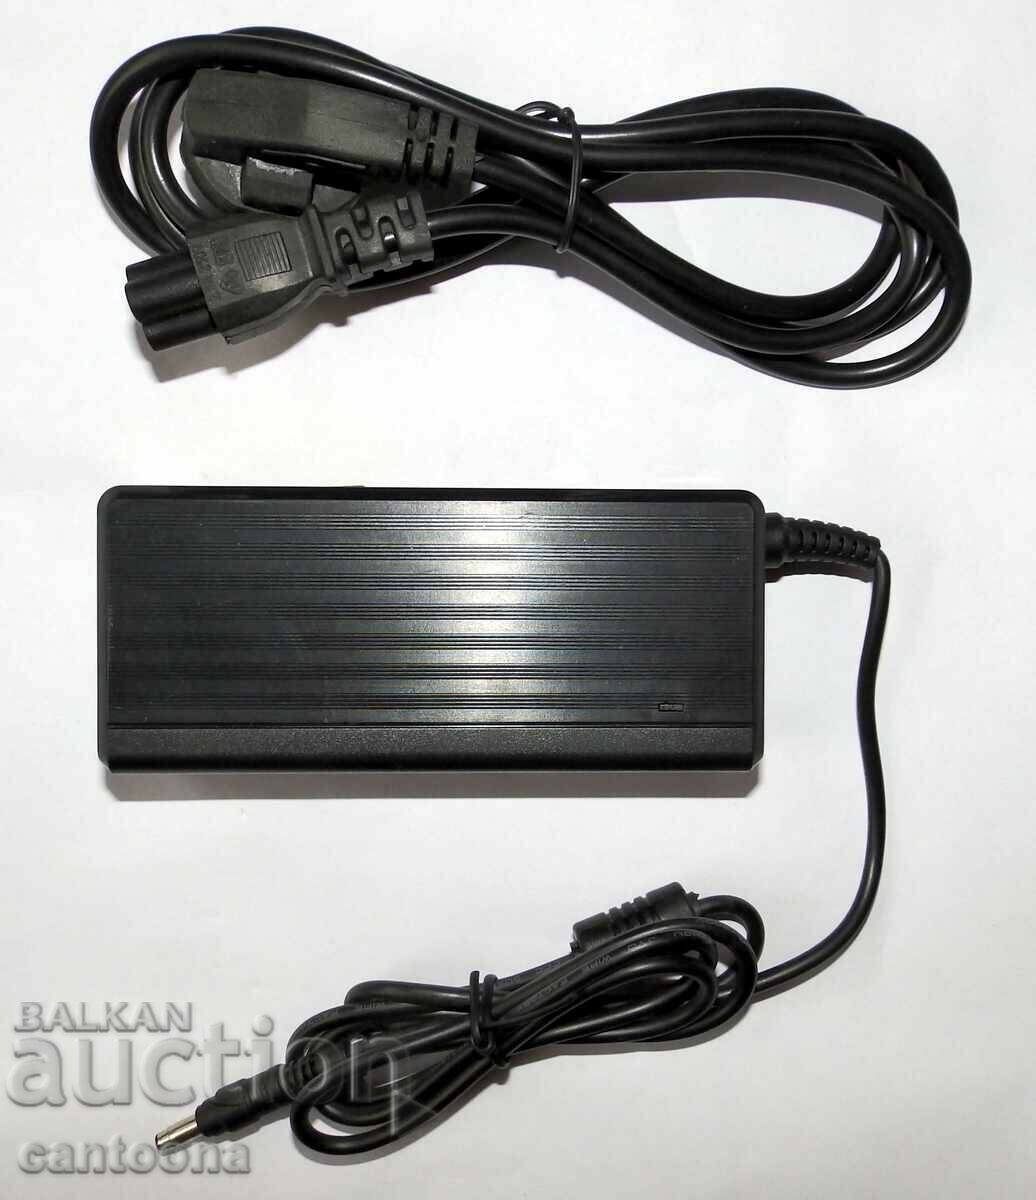 HP/Compaq laptop charger - 90 W with 5.25 x 2.5 mm plug